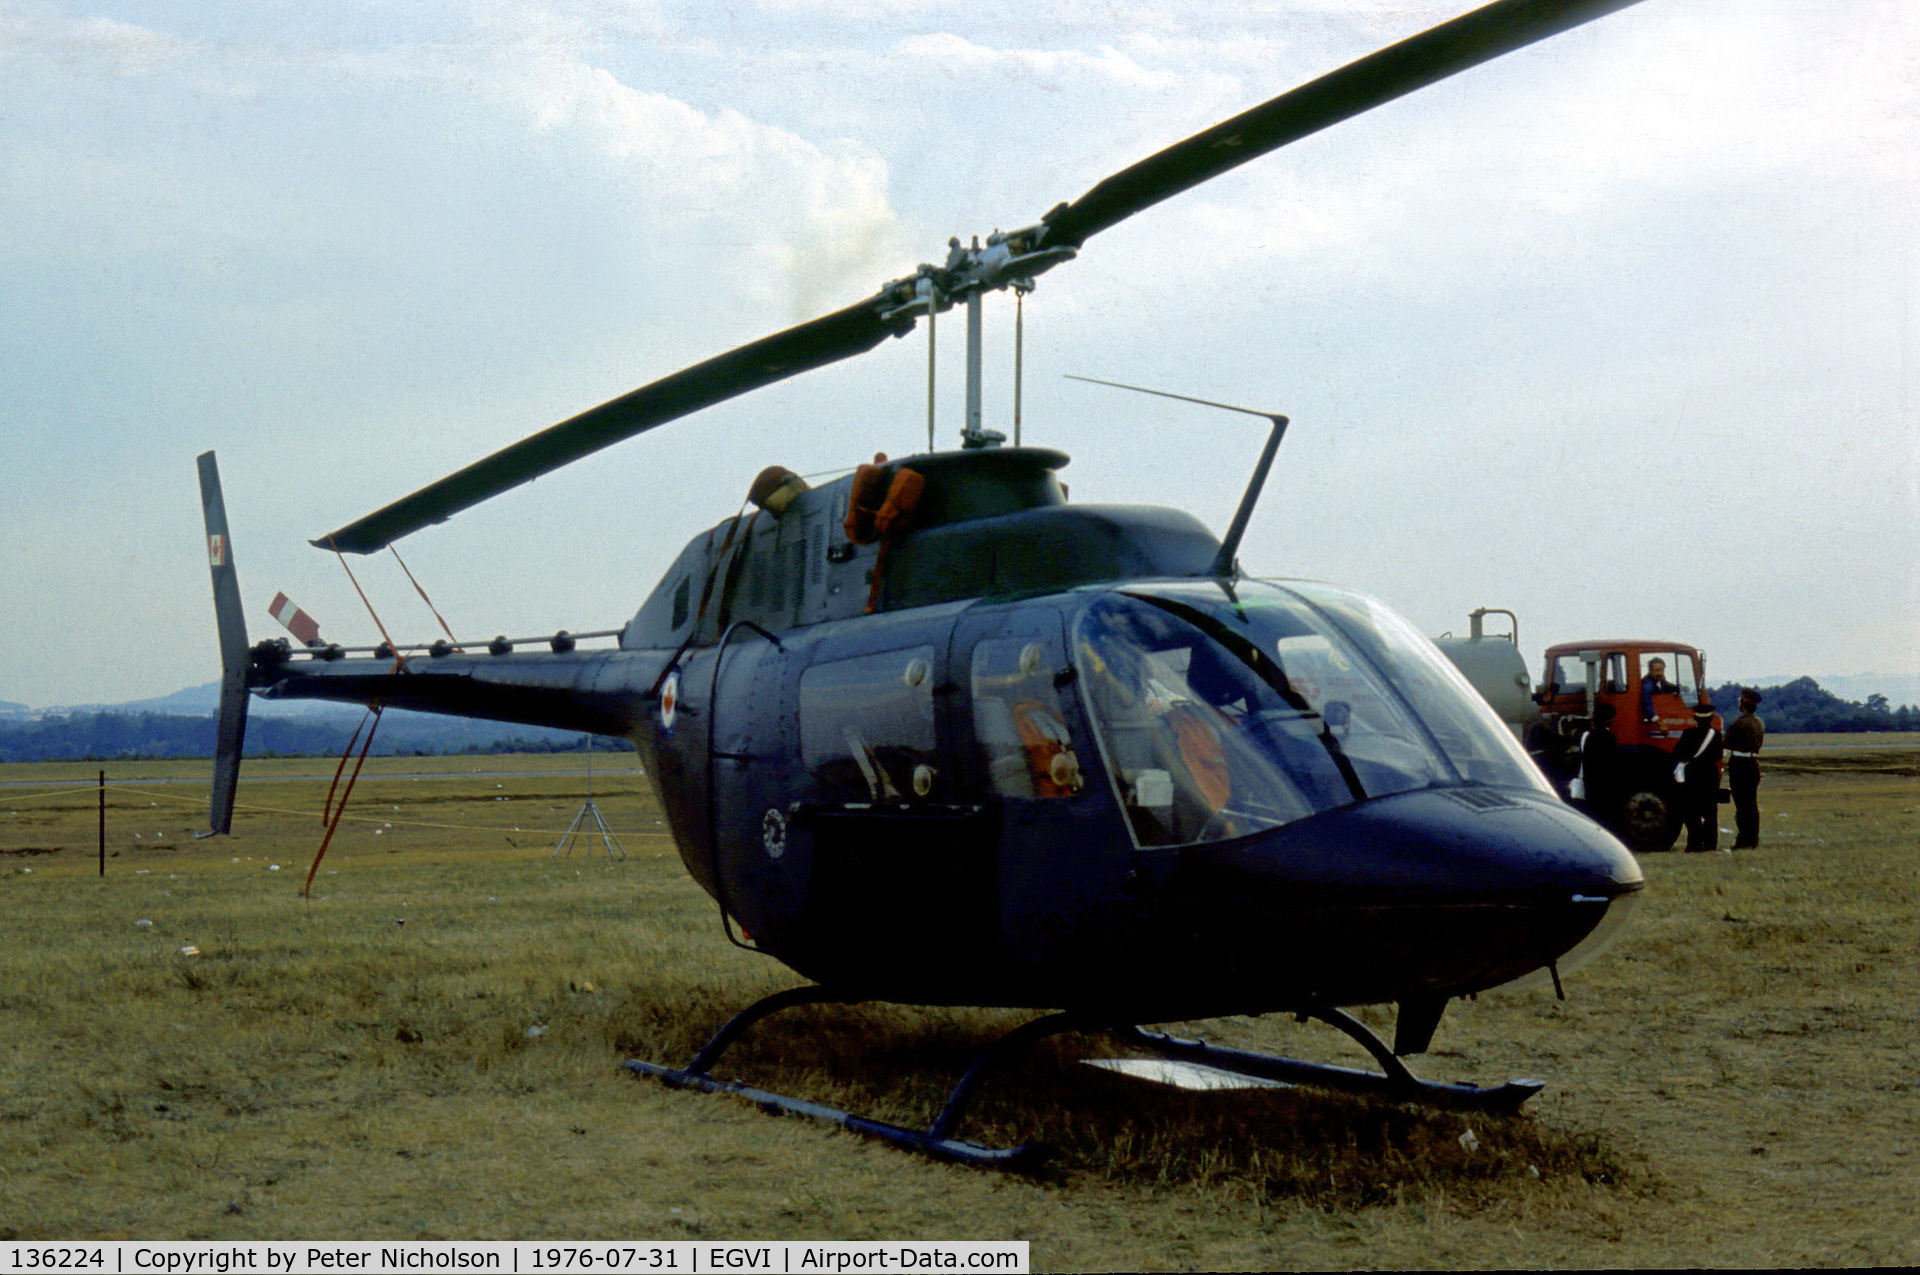 136224, 1972 Bell CH-136 Kiowa C/N 44024, CH-136 Kiowa of 444 Squadron Canadian Armed Forces based at Lahr on display at the 1976 Intnl Air Tattoo at RAF Greenham Common.